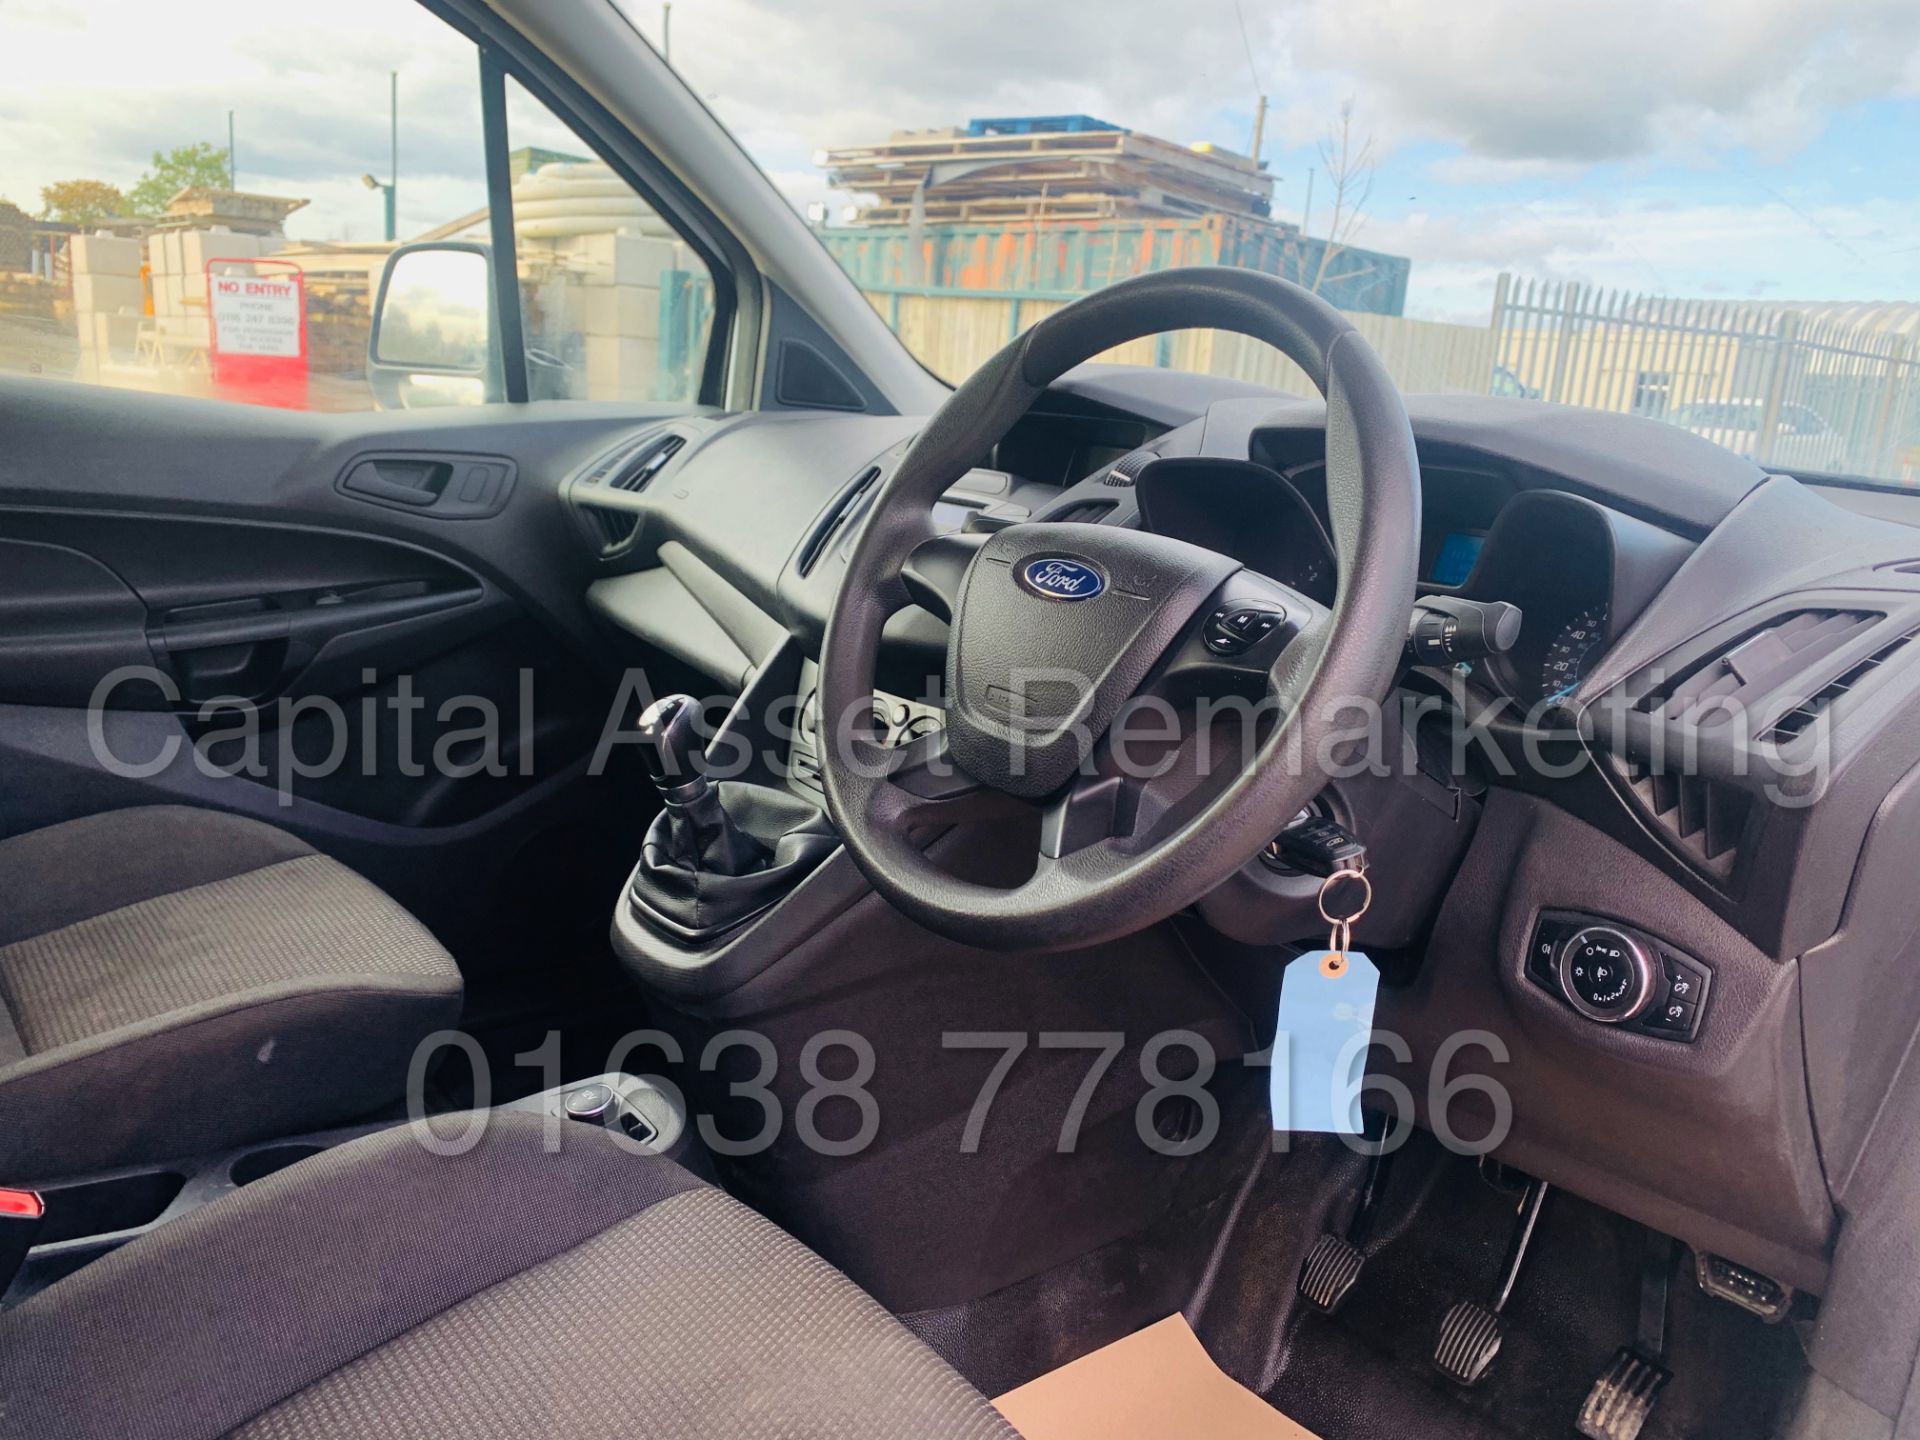 (ON SALE) FORD TRANSIT CONNECT *LWB - 5 SEATER CREW VAN* (2018 - EURO 6) 1.5 TDCI *A/C* (1 OWNER) - Image 30 of 40